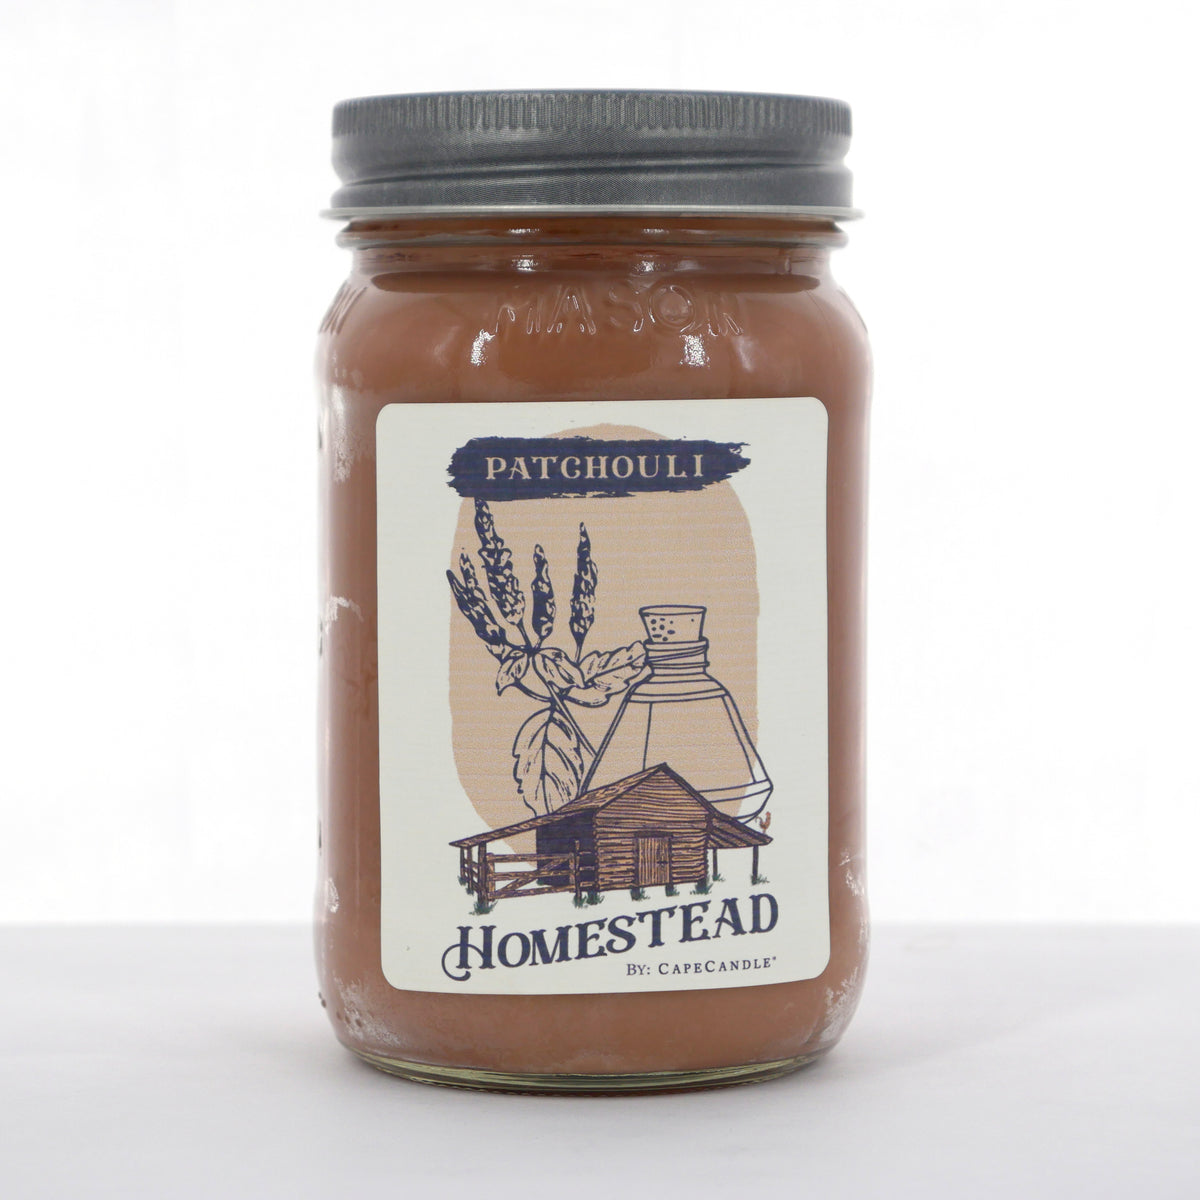 Patchouli Soy Candle 16oz Homestead Mason Jar by Cape Candle